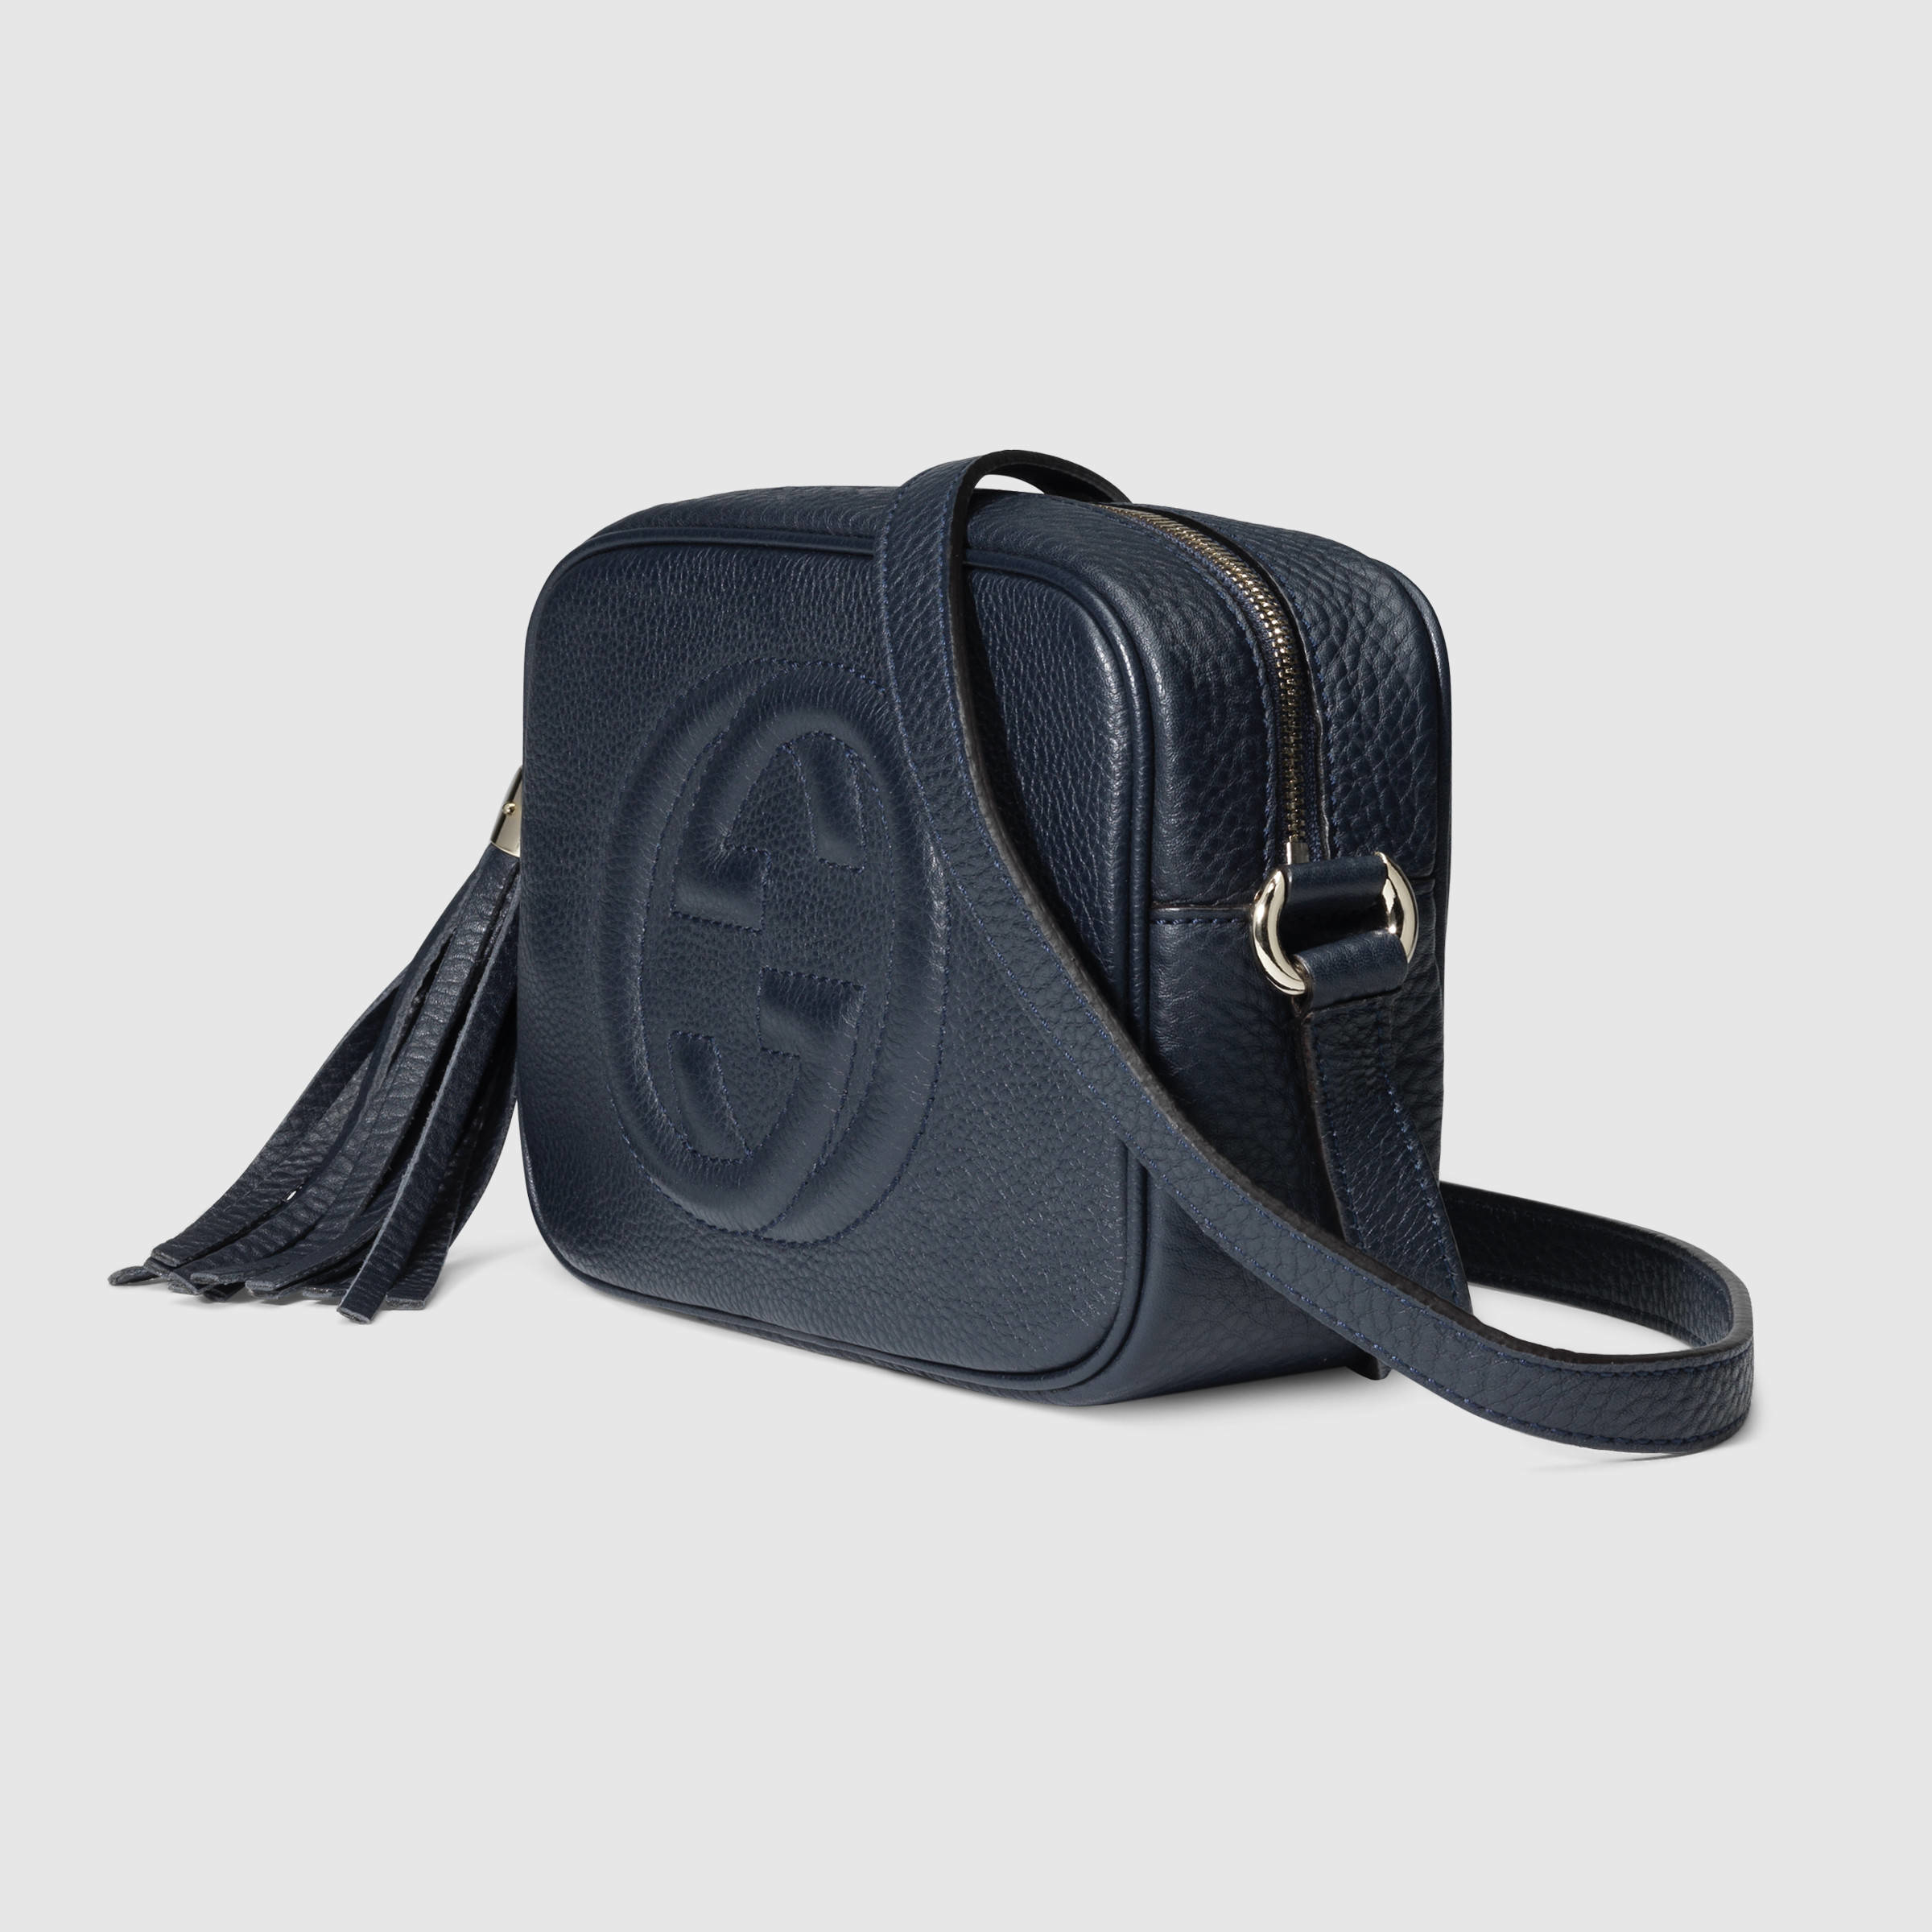 Gucci Soho Leather Bag in Blue | Lyst